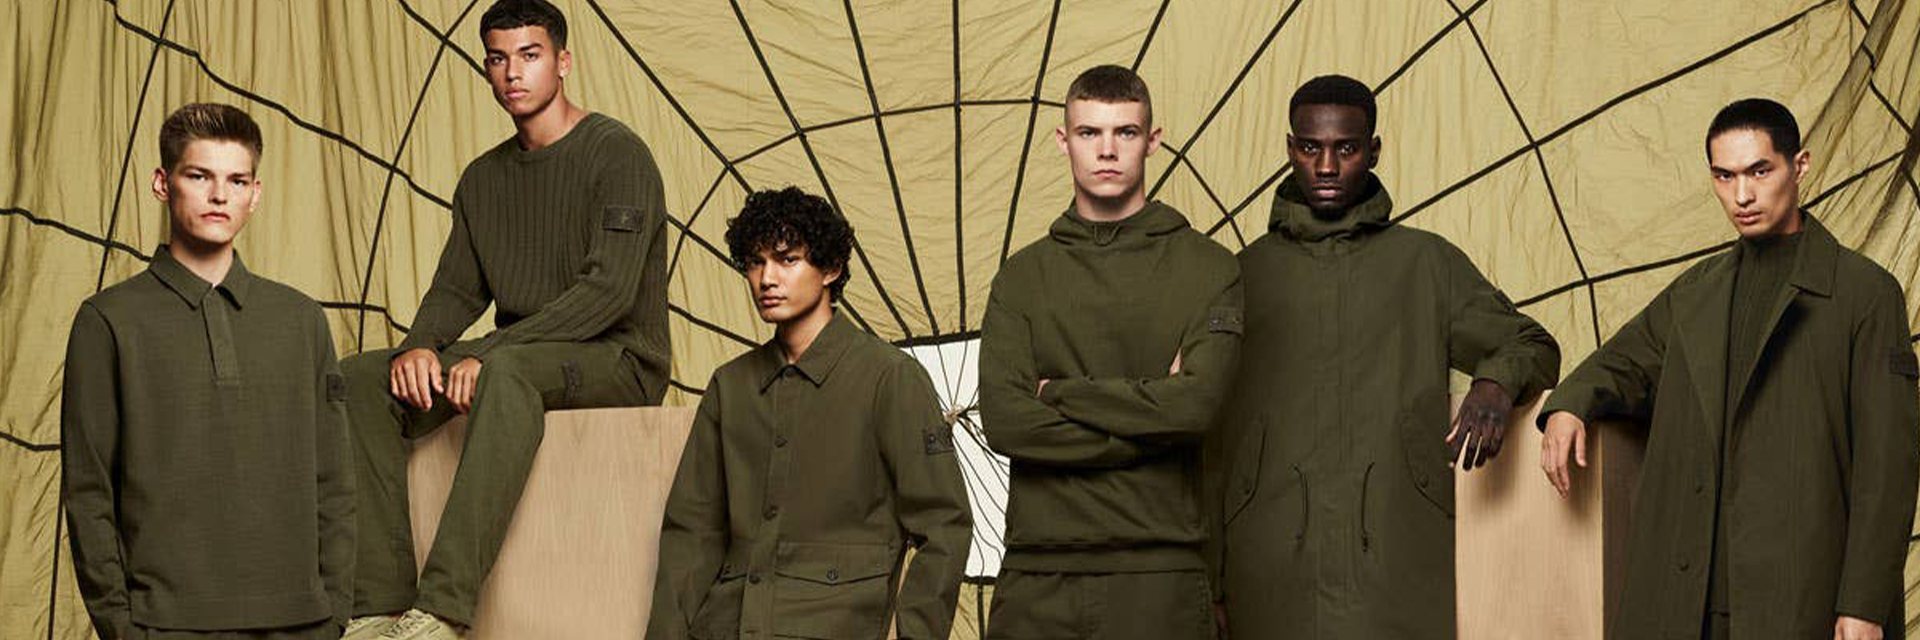 You can find the latest Stone Island articles here!